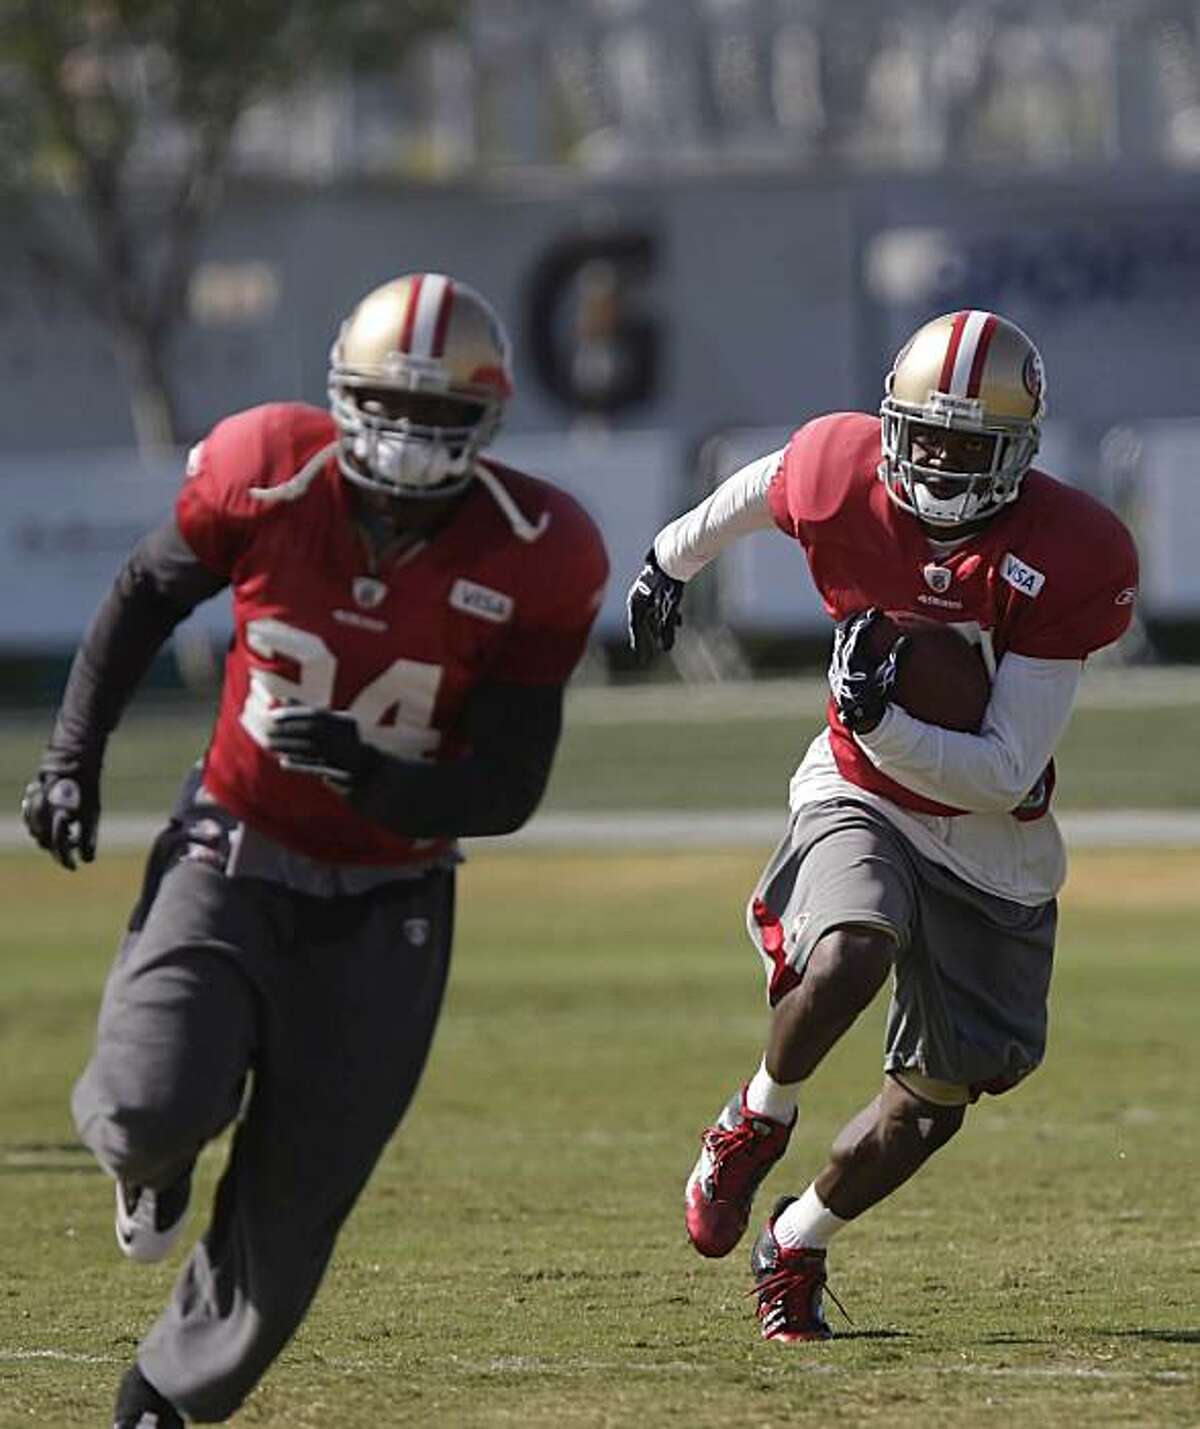 49ers #17 Dominique Zeigler (right) runs with the football during practice at training camp in Santa Clara, Calif. on Thursday August 19, 2010.